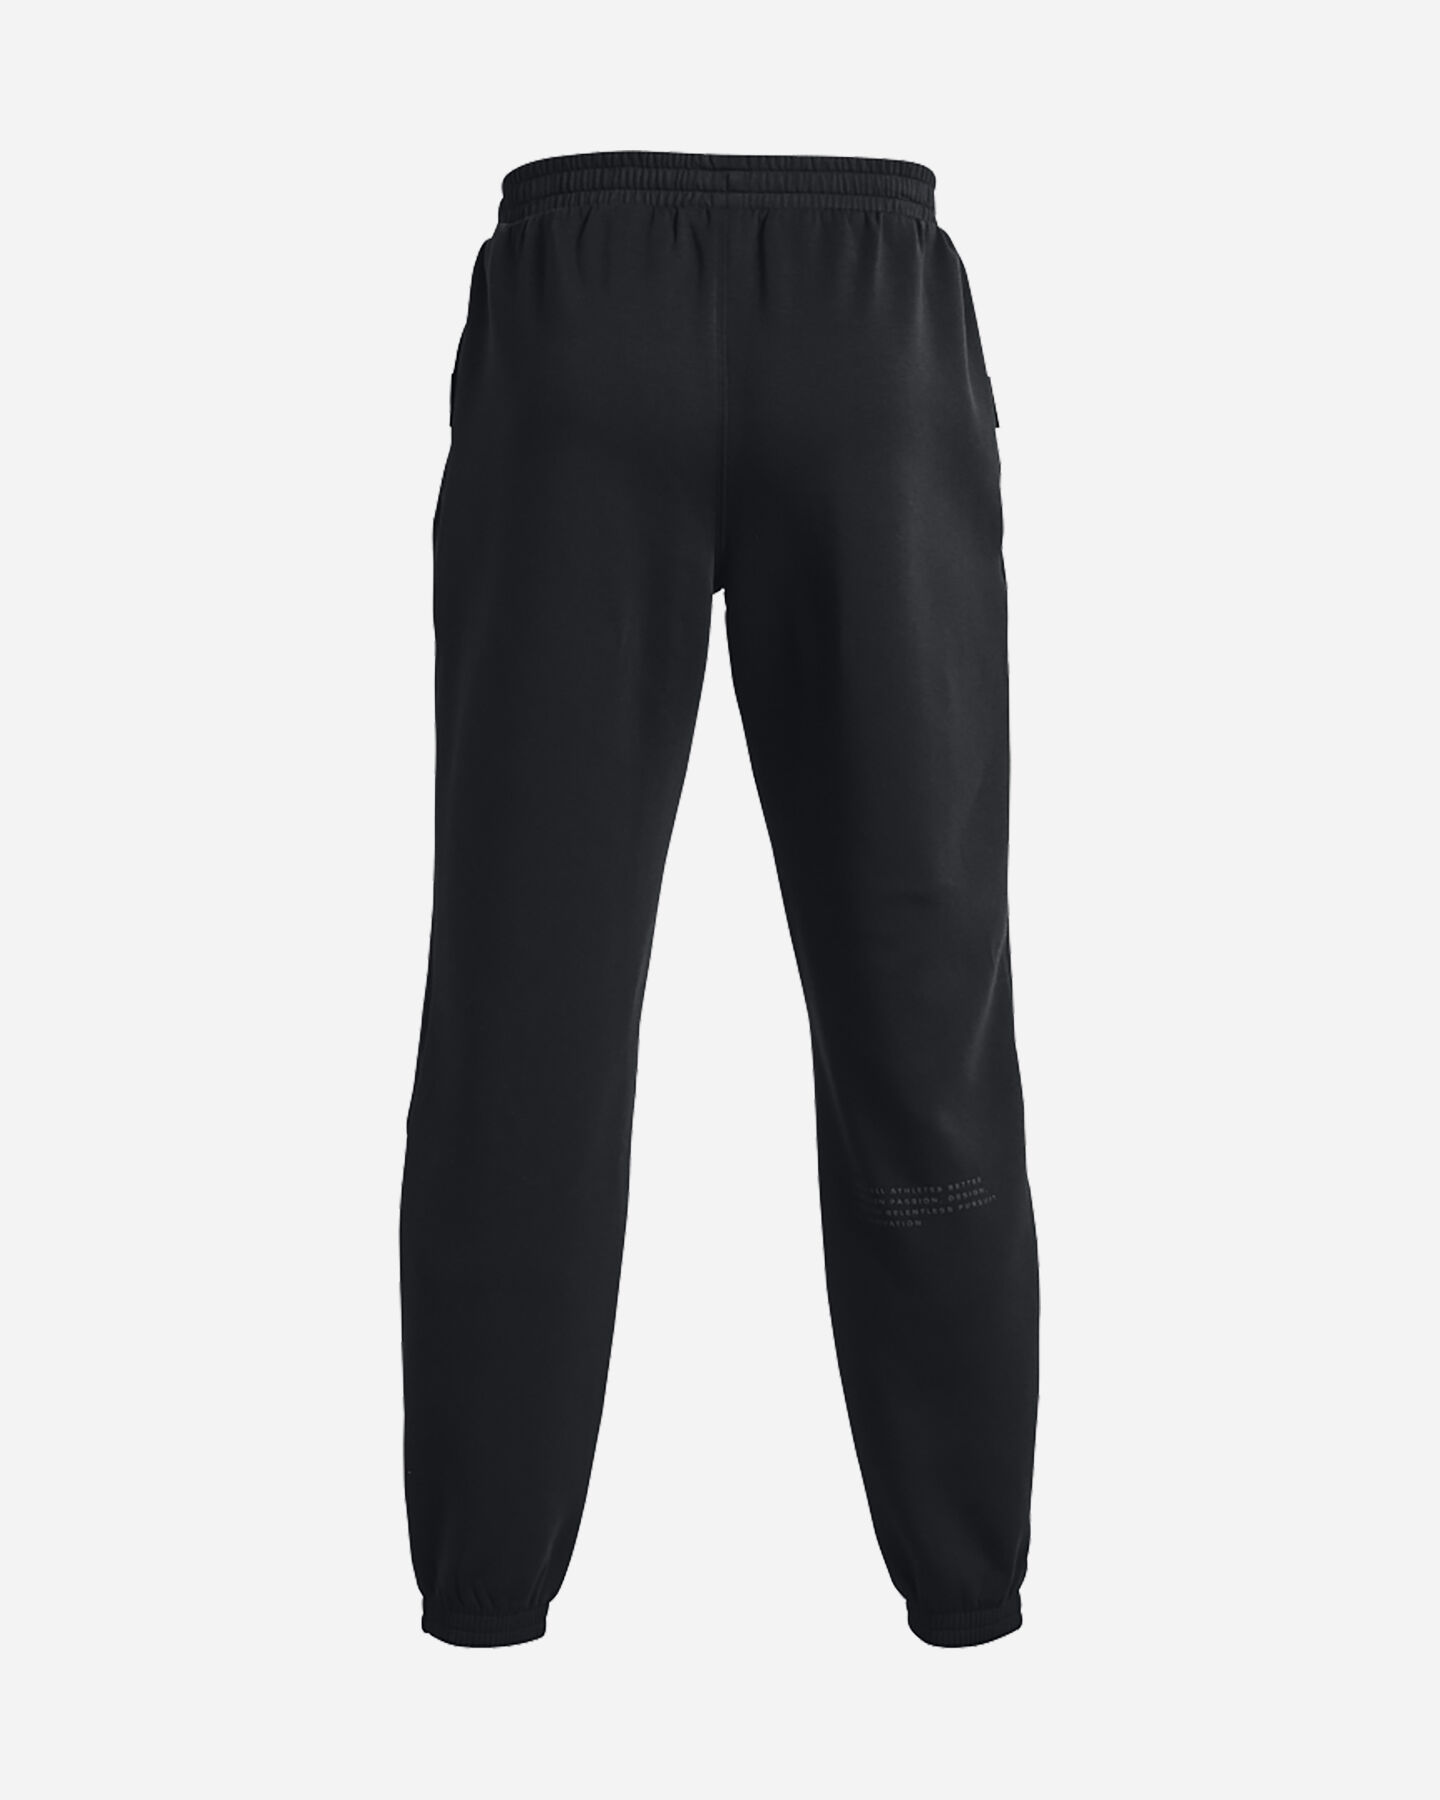  Pantalone UNDER ARMOUR SUMMIT KNIT M S5459284|0001|XS scatto 1